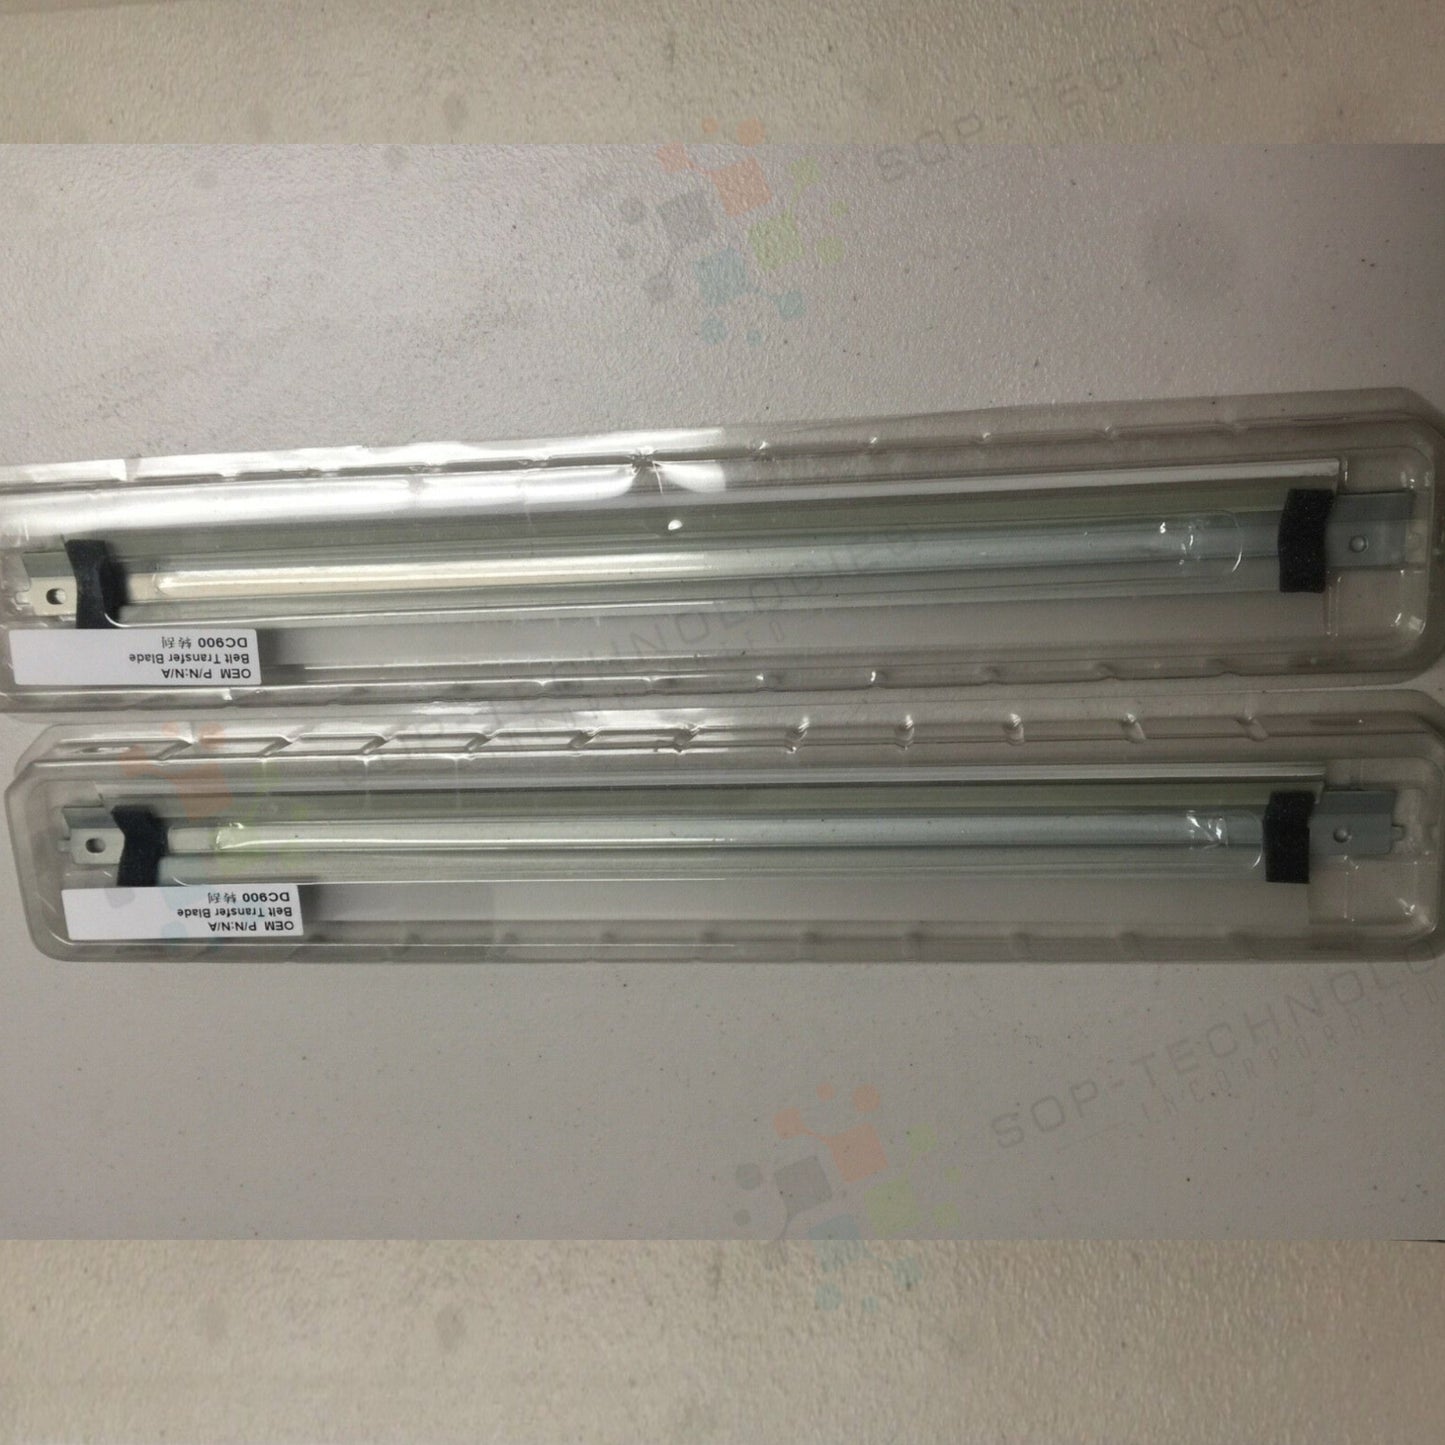 2 IBT Cleaning Blades for Xerox DC4110 4112 4595 4127 7000 D95 D110 D125 USA - SOP-TECHNOLOGIES, INC.